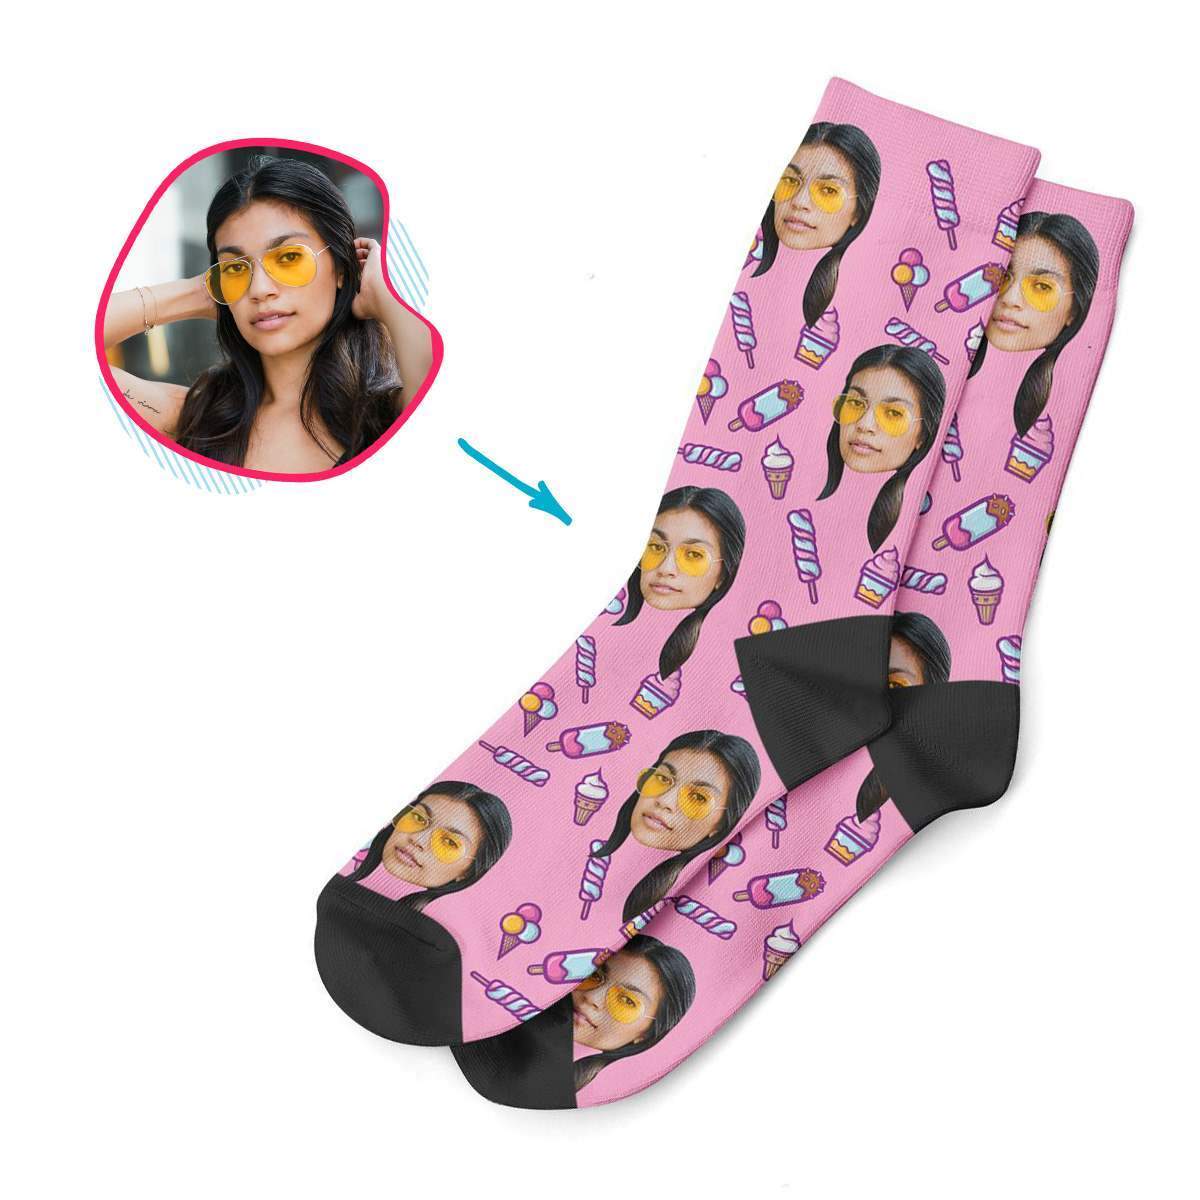 pink Candies socks personalized with photo of face printed on them